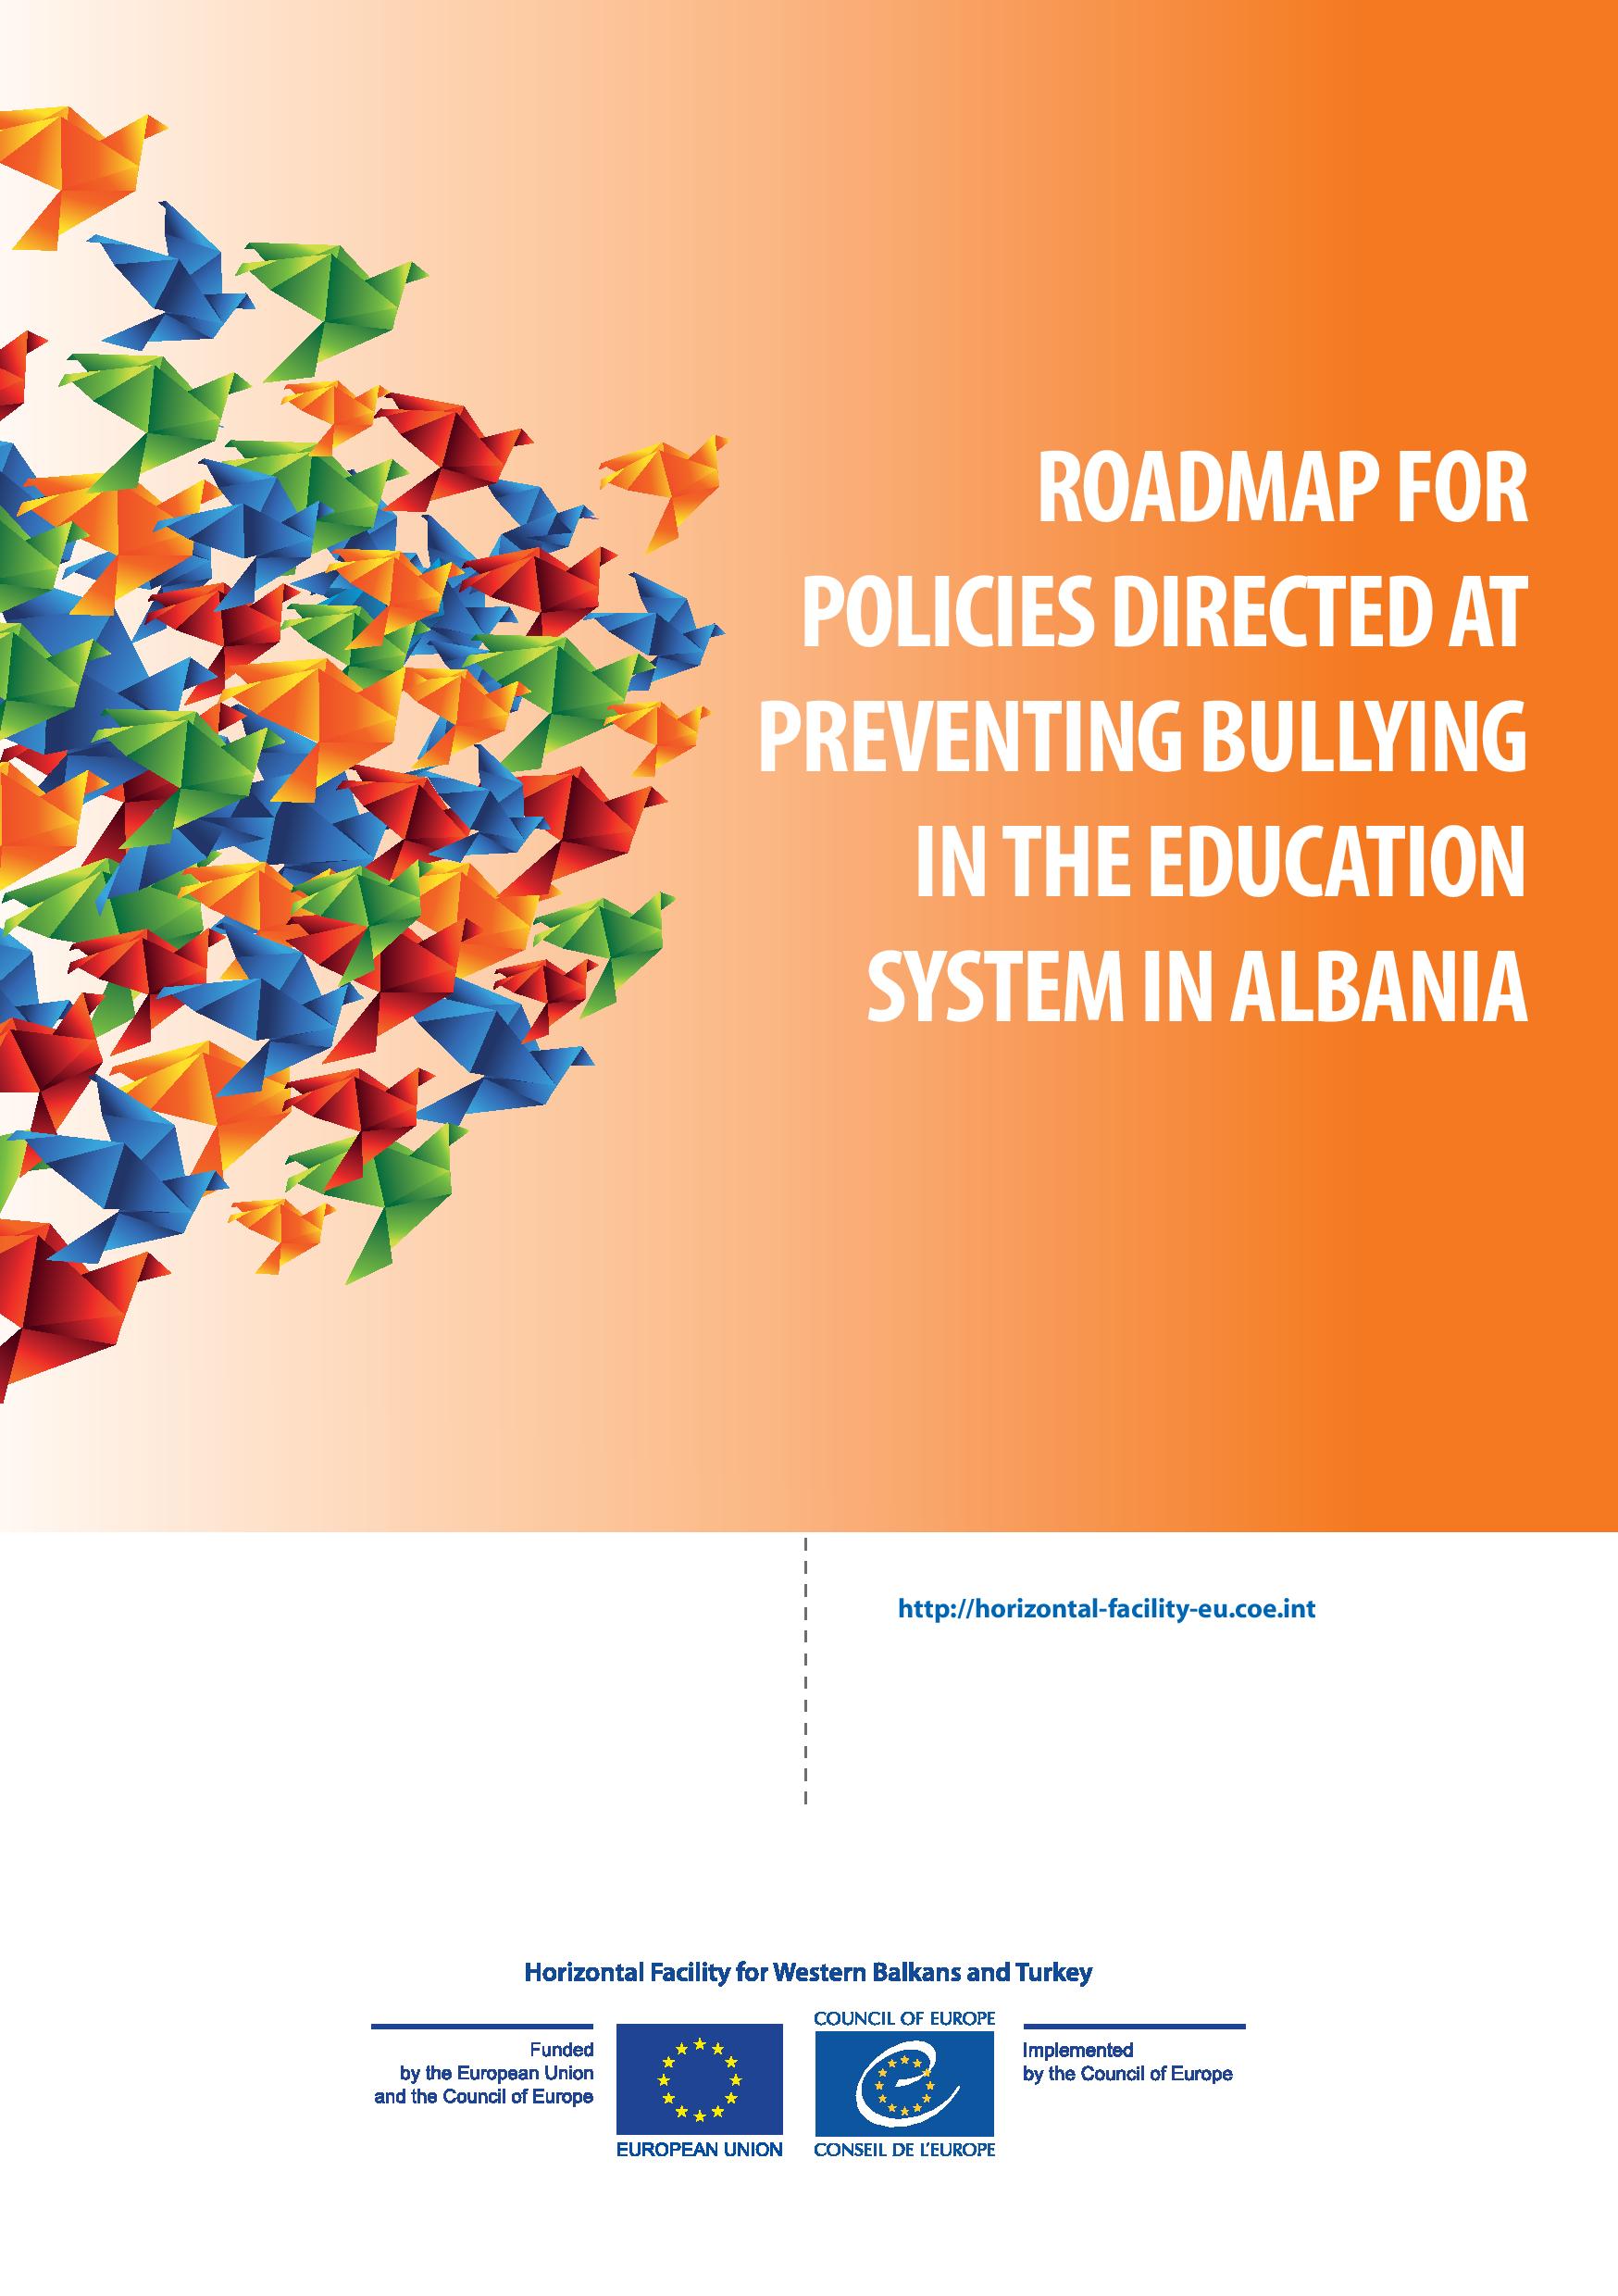 Roadmap for Policies Directed at Preventing Bullying in the Education System in Albania